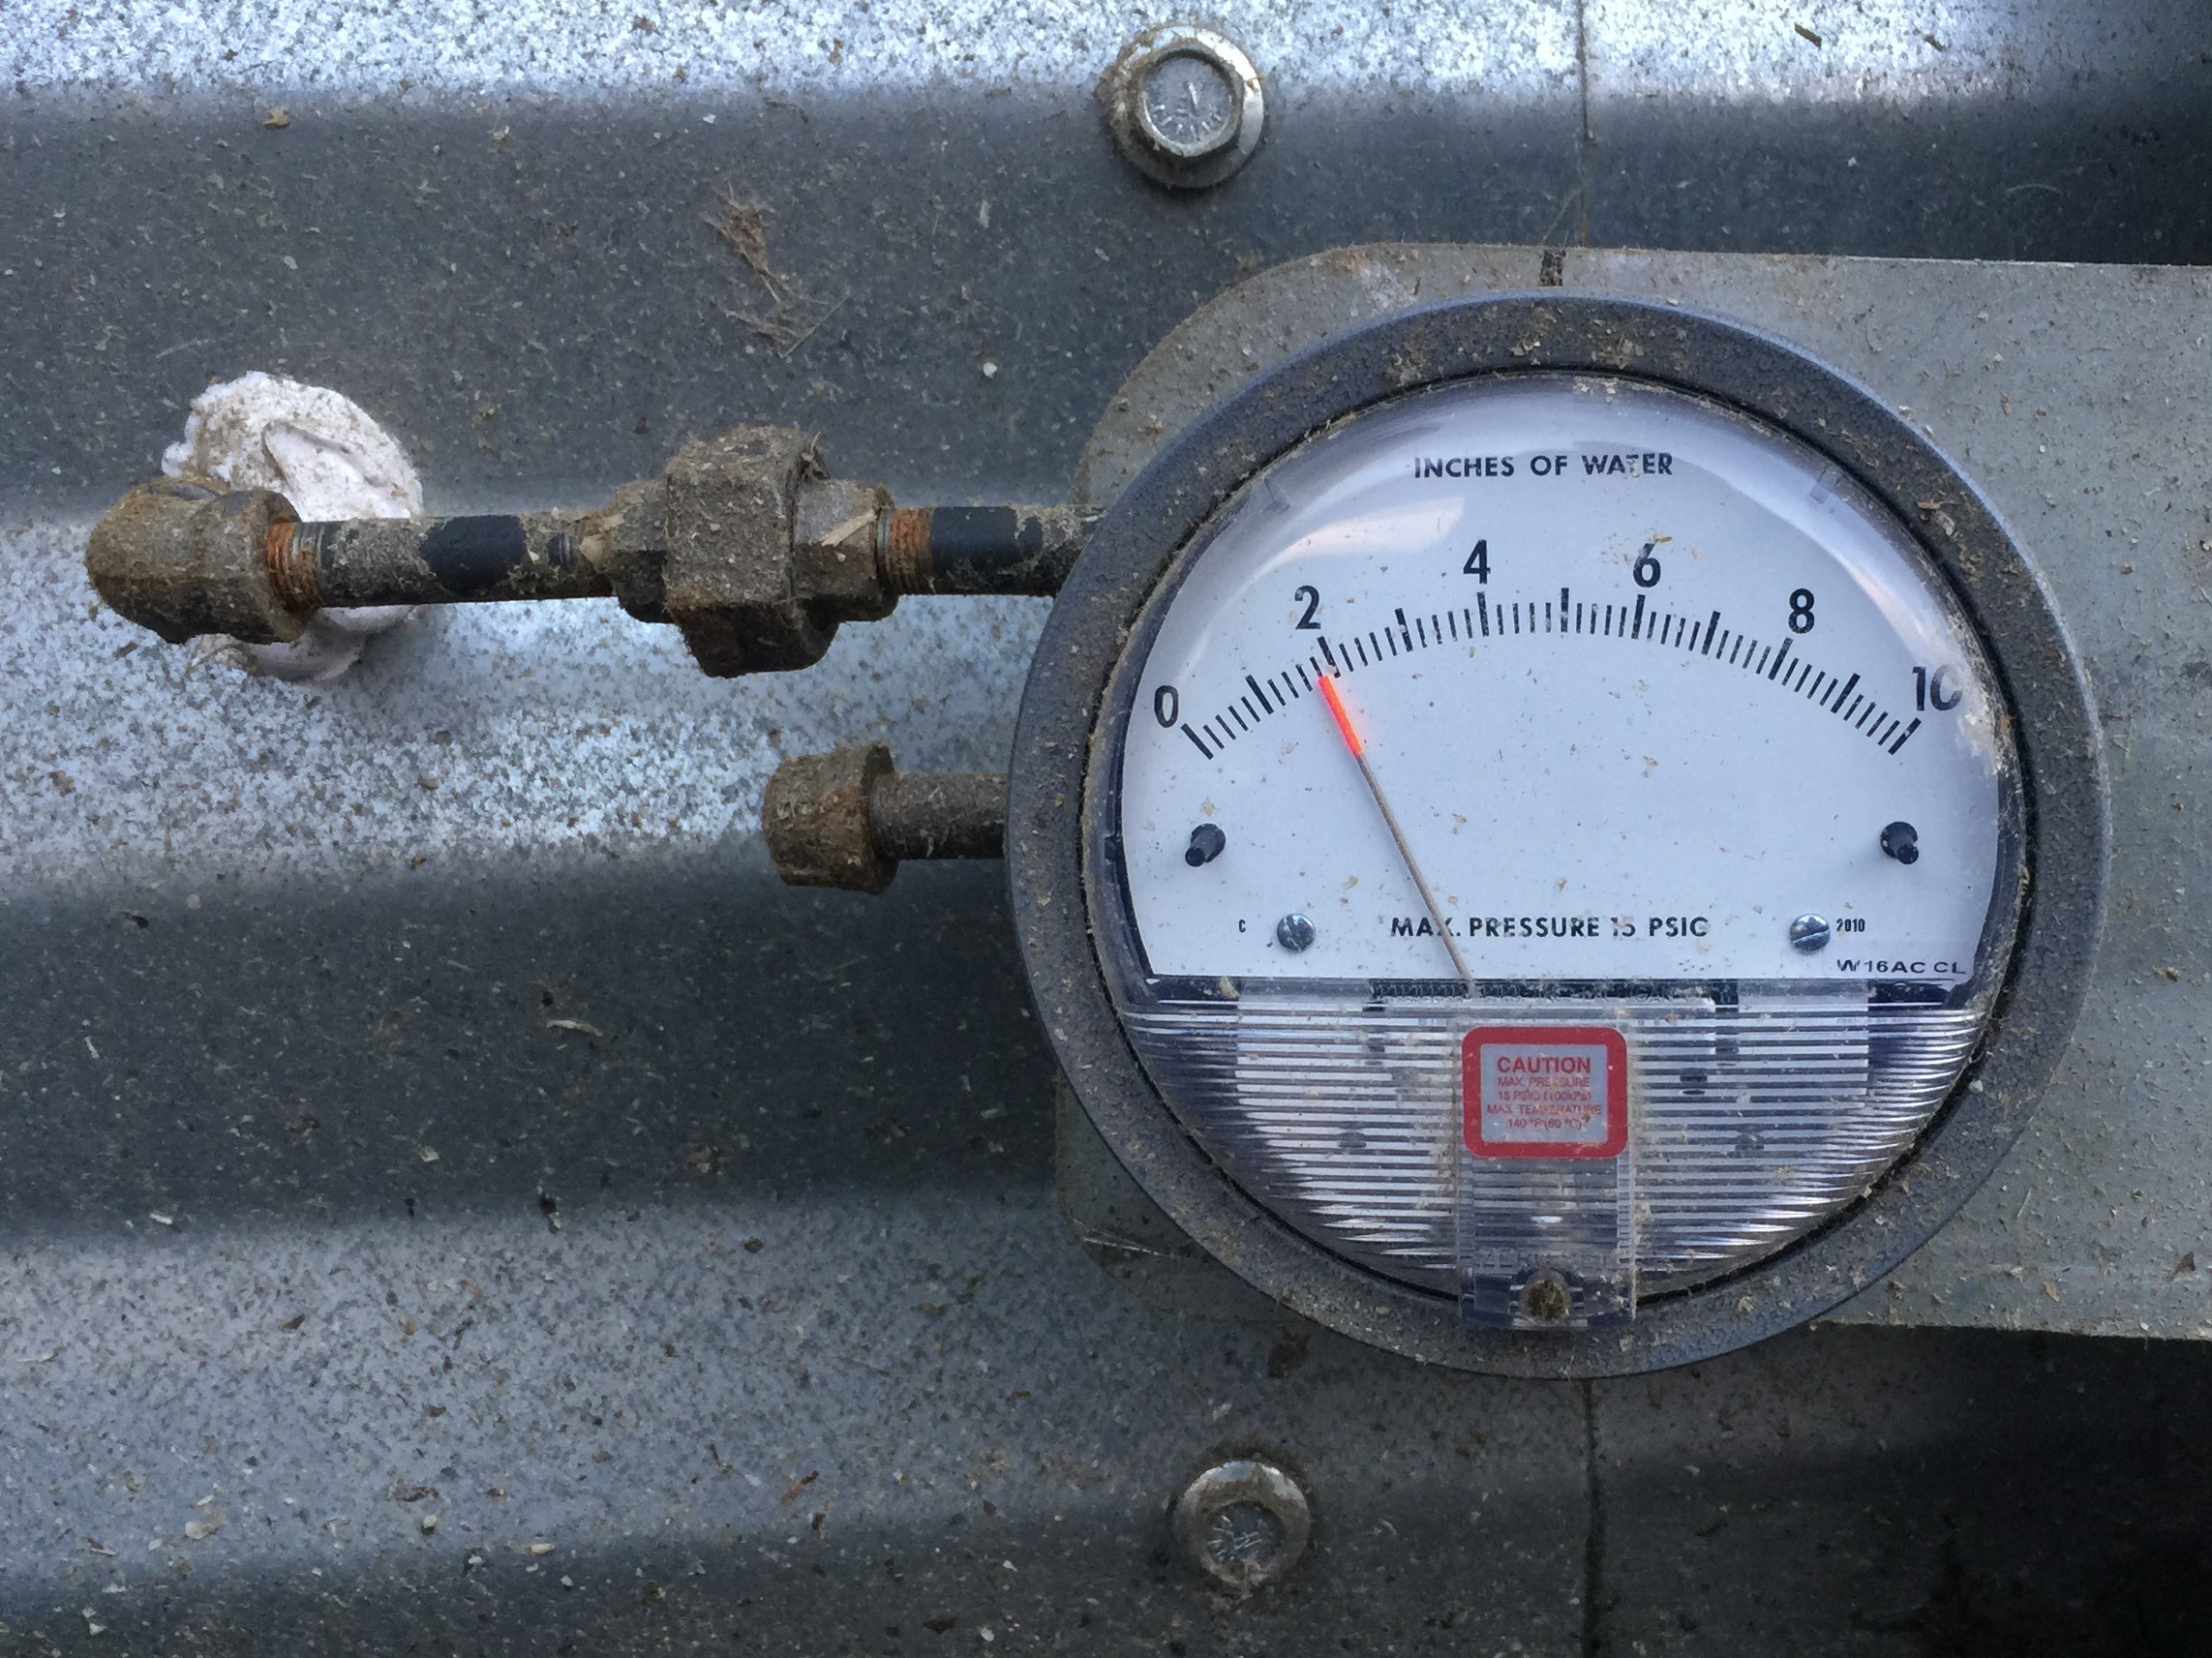 This photo shows a pressure gauge installed on a grain bin, to measure static pressure created by the fan. The gauge is round with a needle that measures pressure in inches of water.